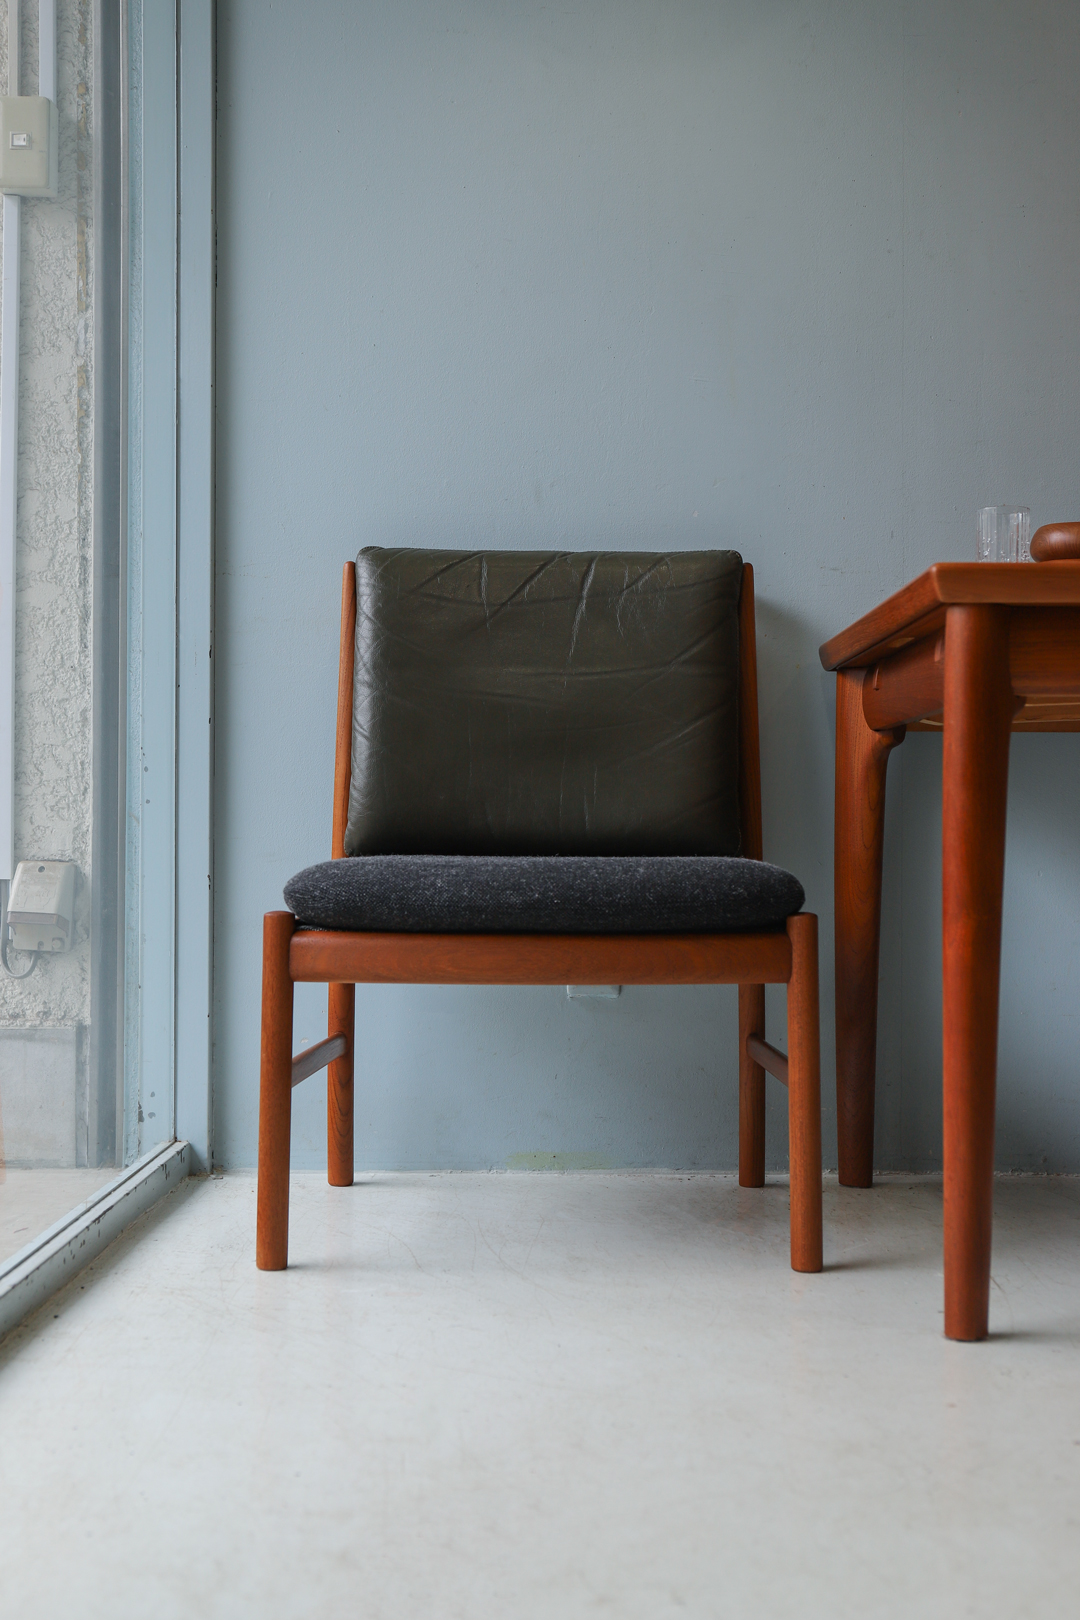 Japanese Vintage HITA CRAFTS Dining Chair Armless/日田工芸 ダイニングチェア アームレス ジャパンヴィンテージ チーク材